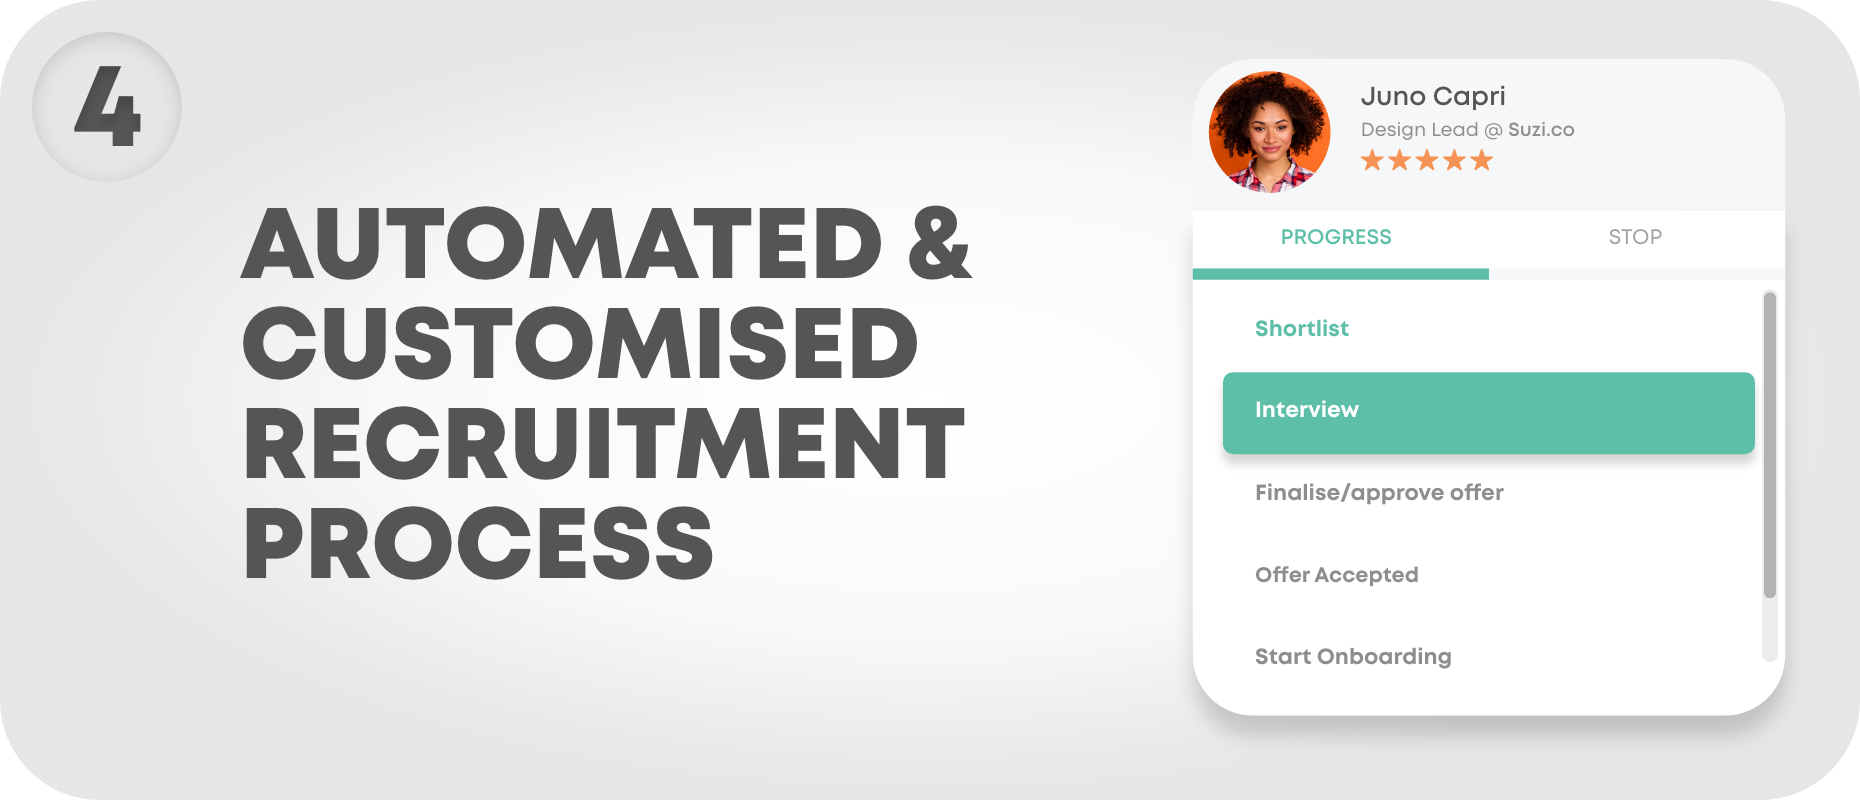 004.-Automated-Customised-Recruitment-Process